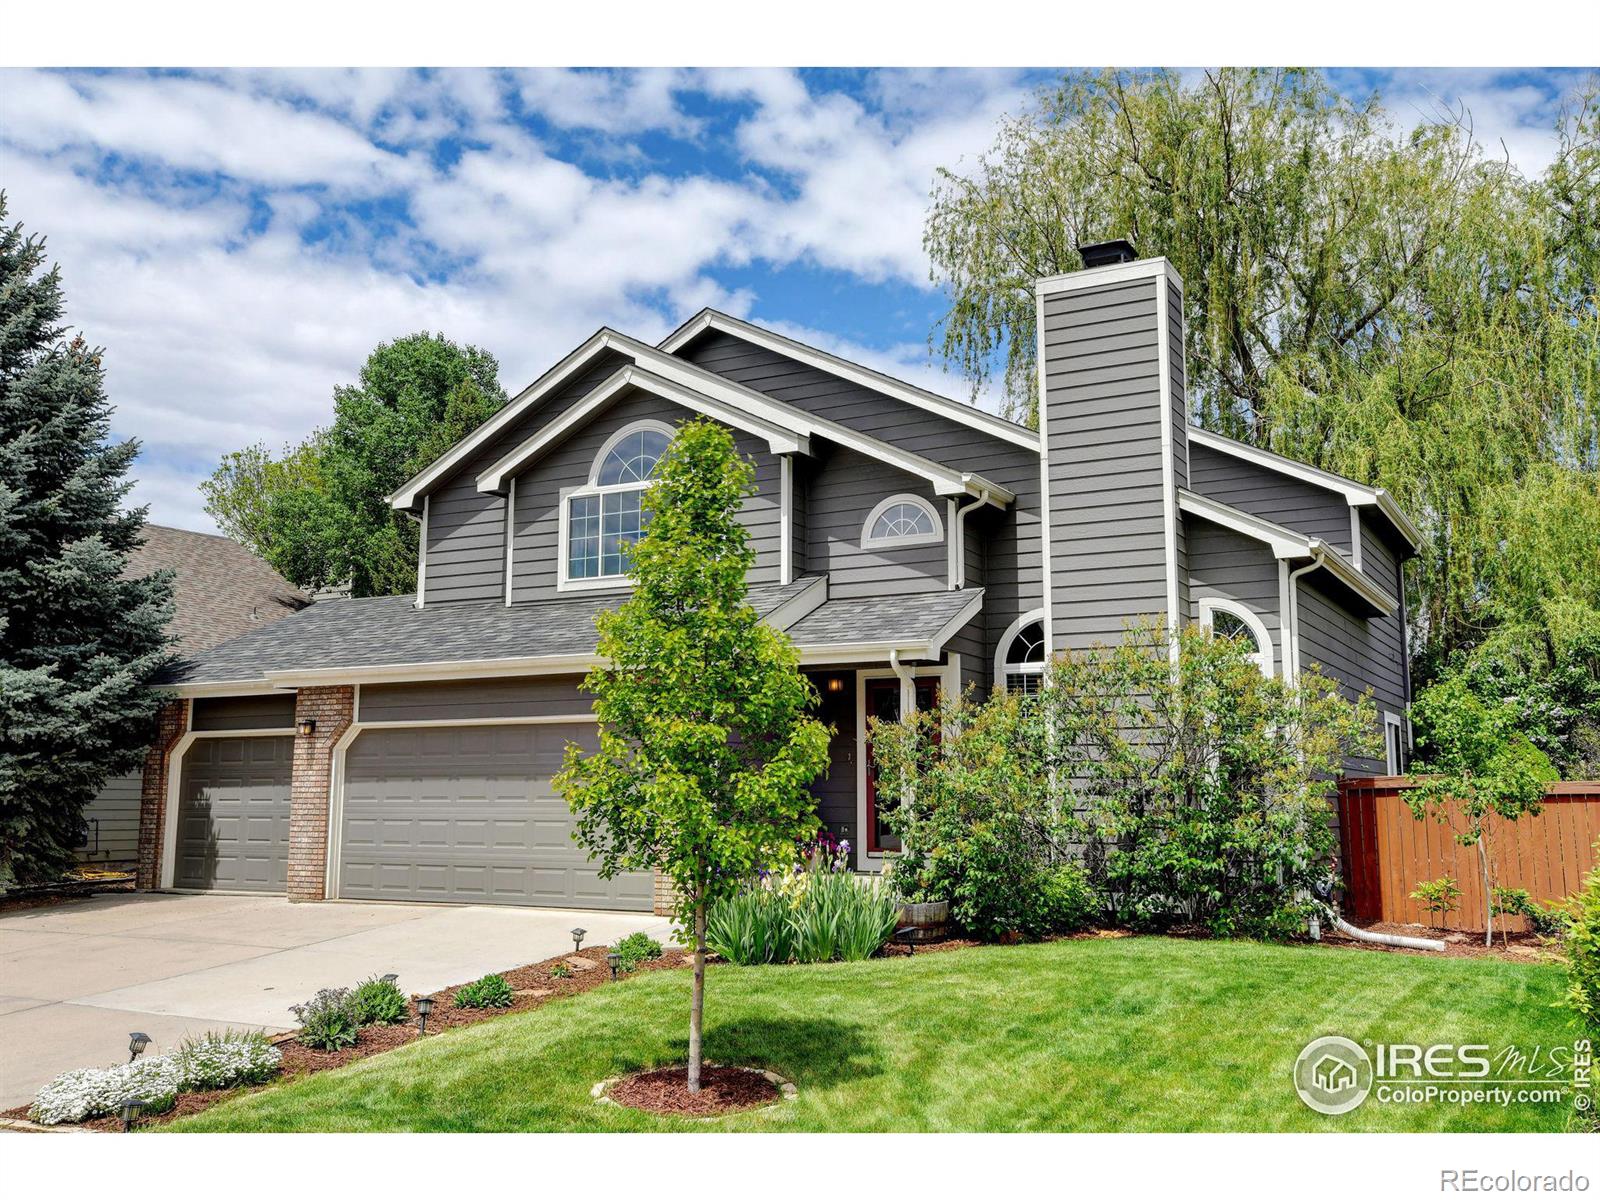 Report Image for 2132  Sweetwater Creek Drive,Fort Collins, Colorado